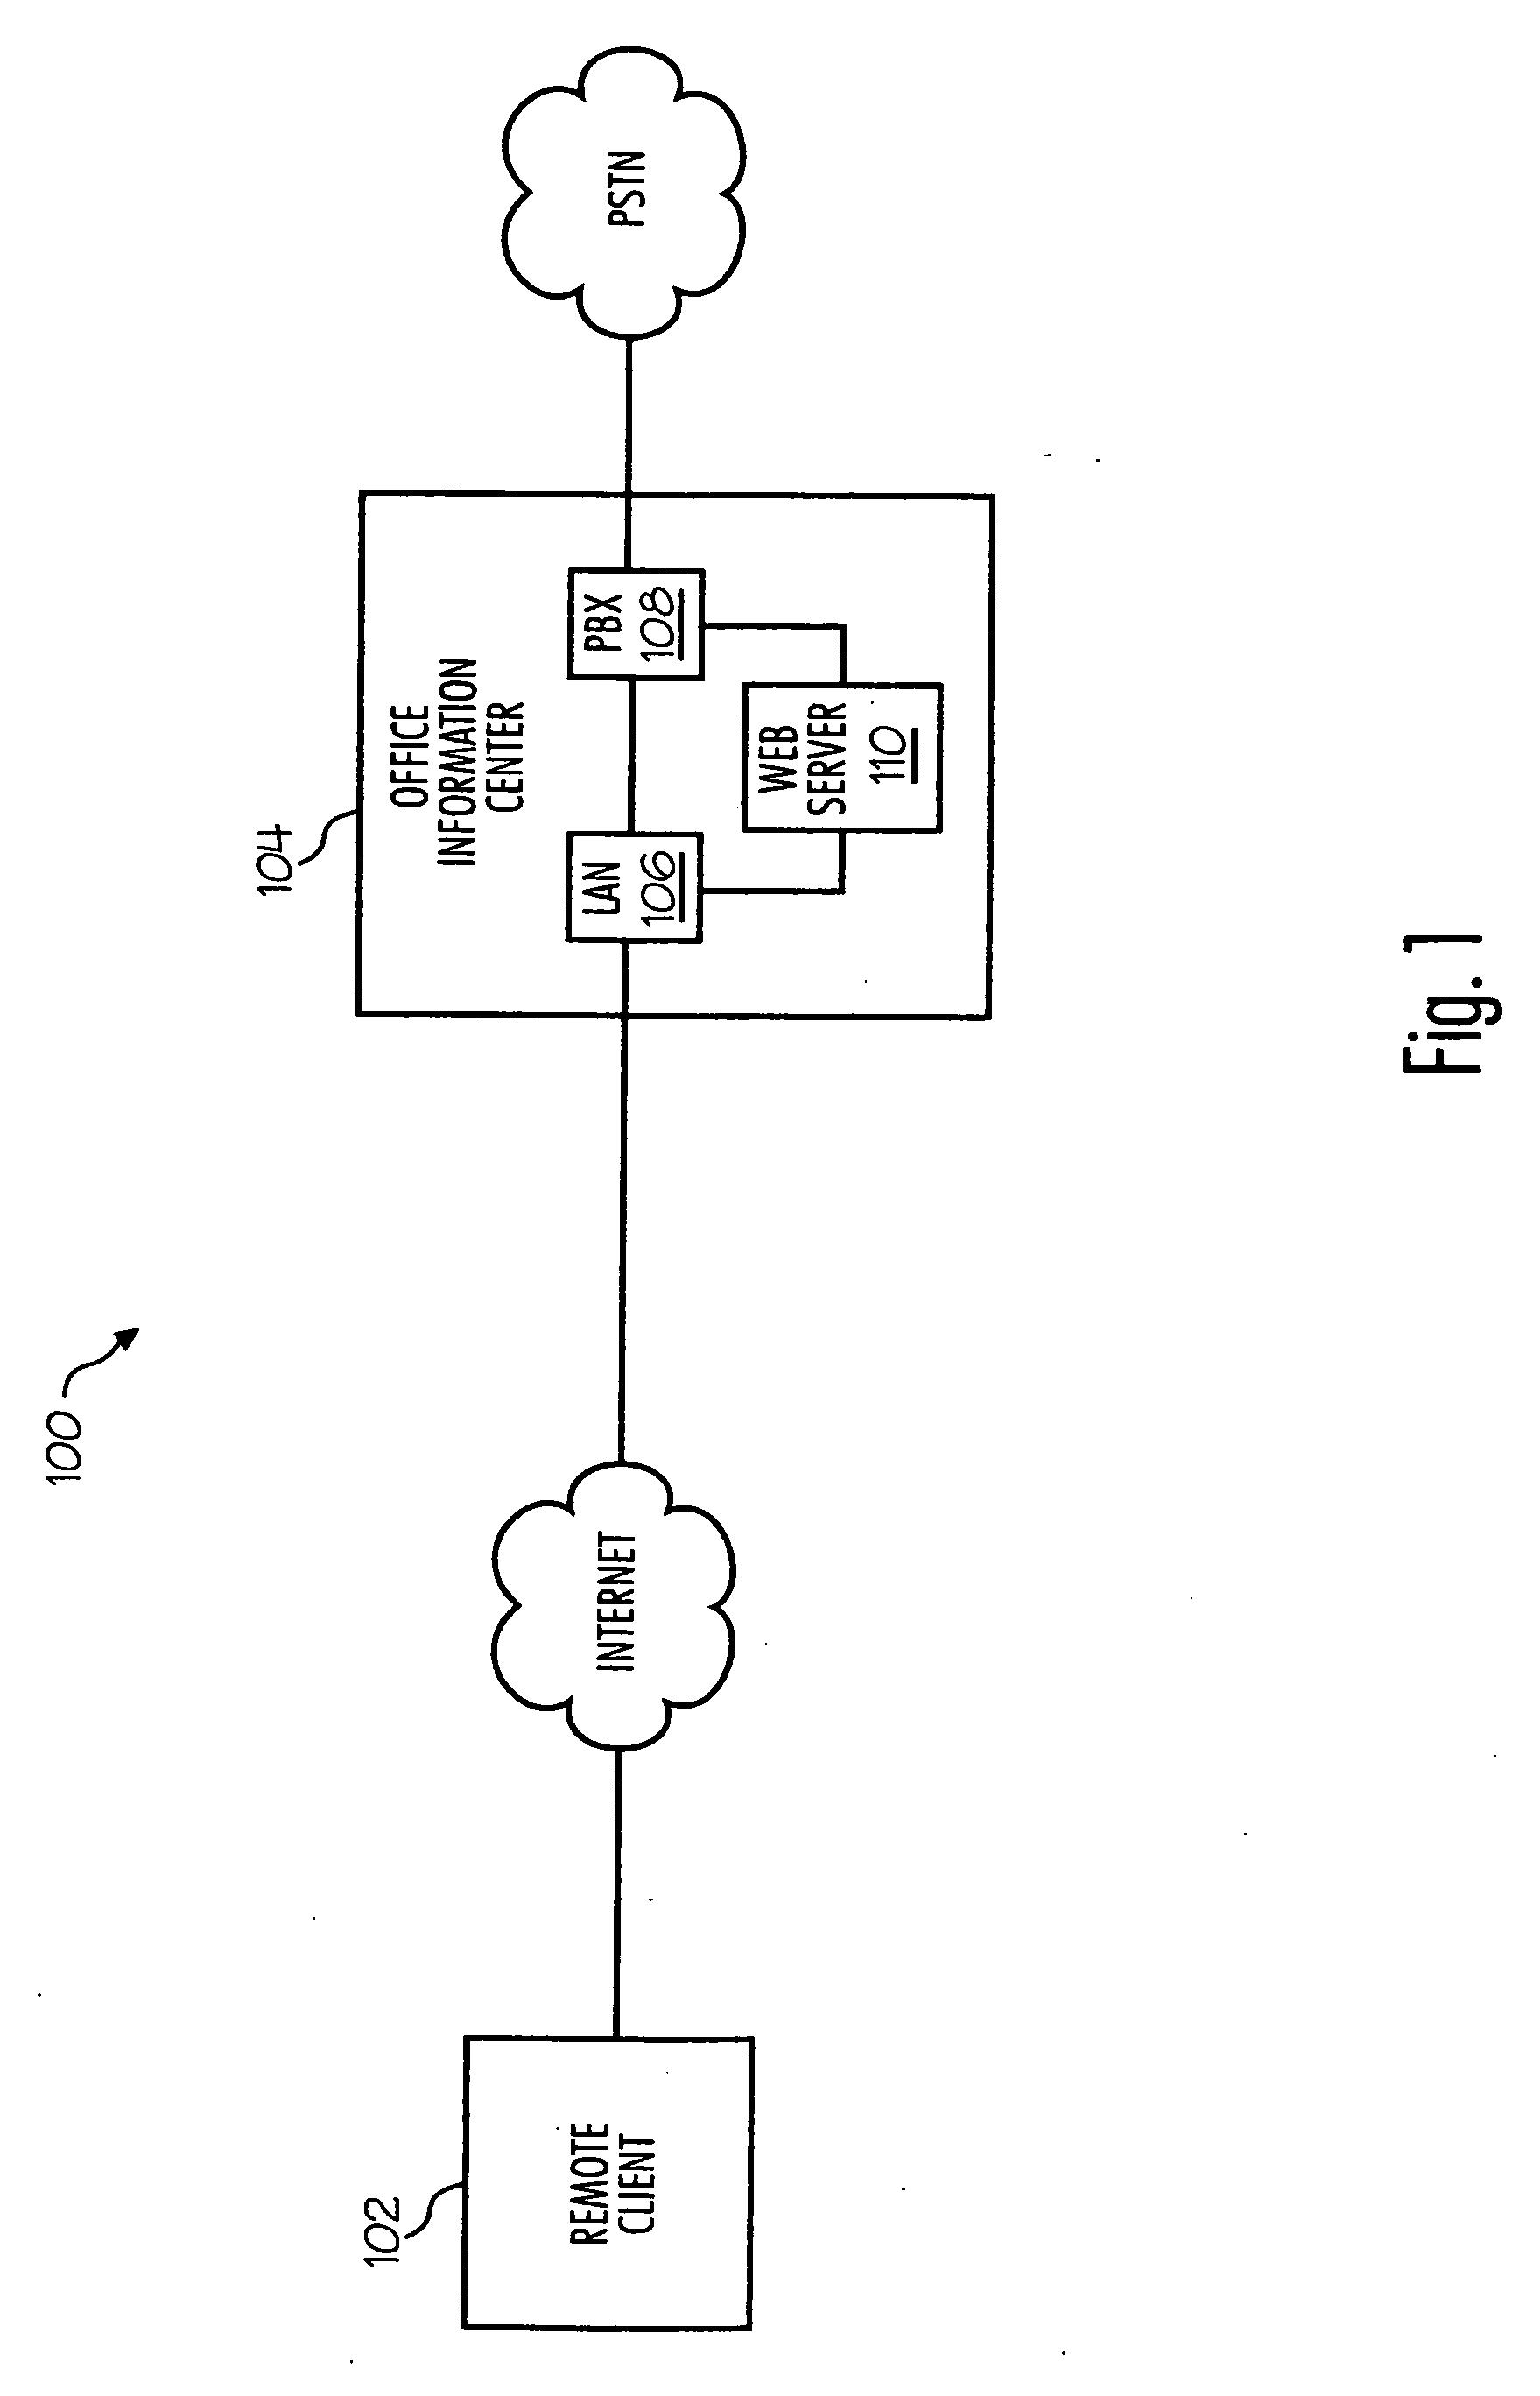 System and method for remote access to a telephone